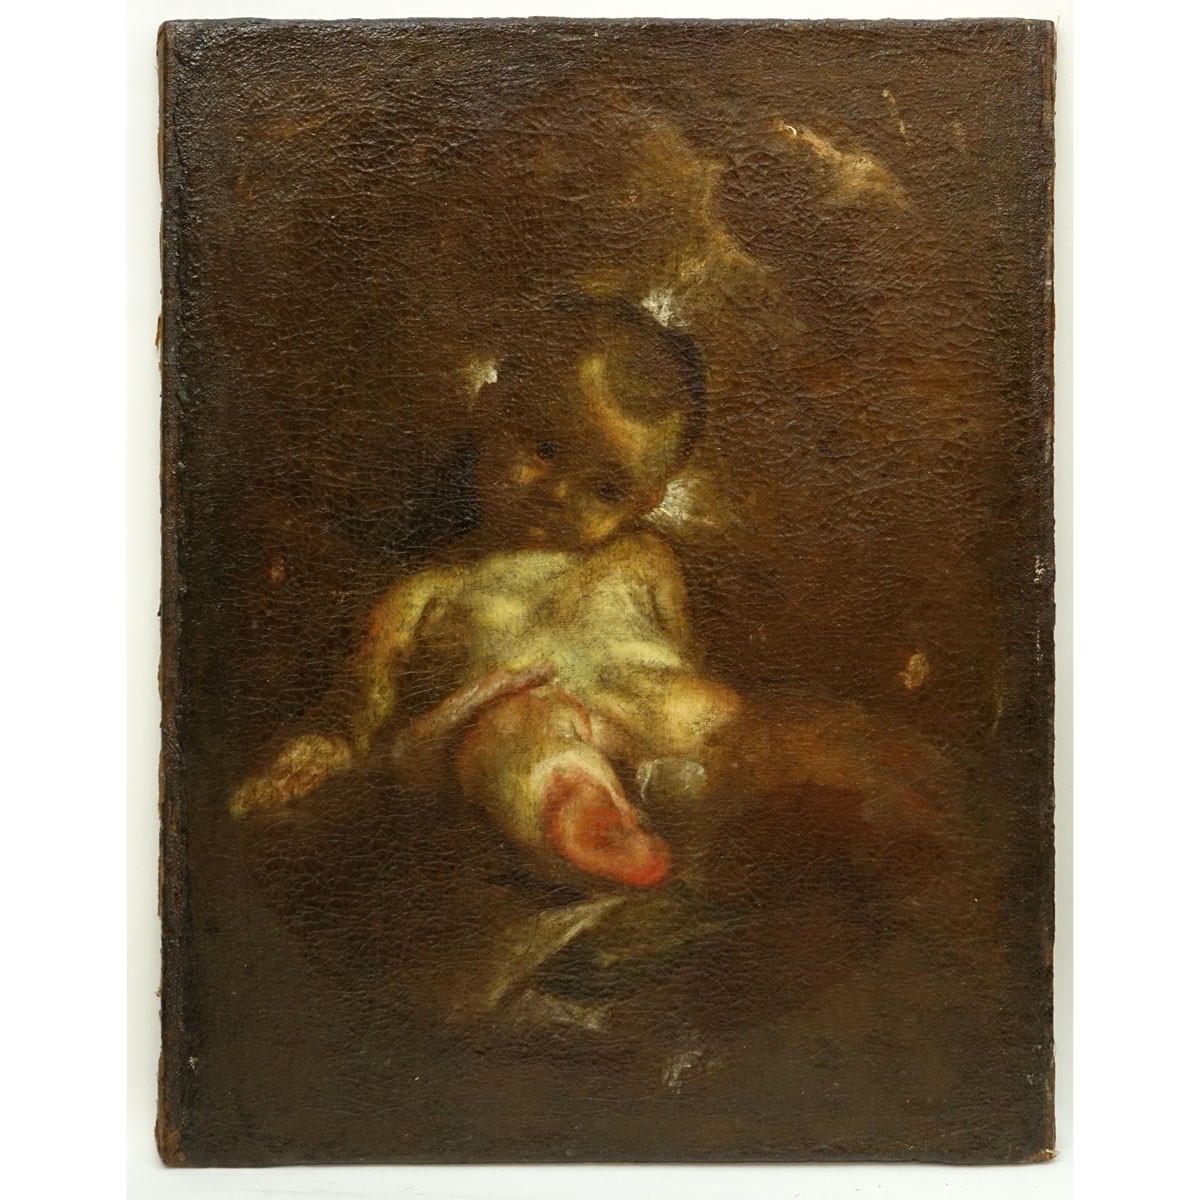 Attributed to: Federico Barocci, Italian (1526/28 - 1612) Oil on Canvas "Sketch of a Child", Label inscribed 'Federigo Barocci' with title en verso. Conserved condition, varnish throughout, heavy craquelure, in painting and darkening to canvas.